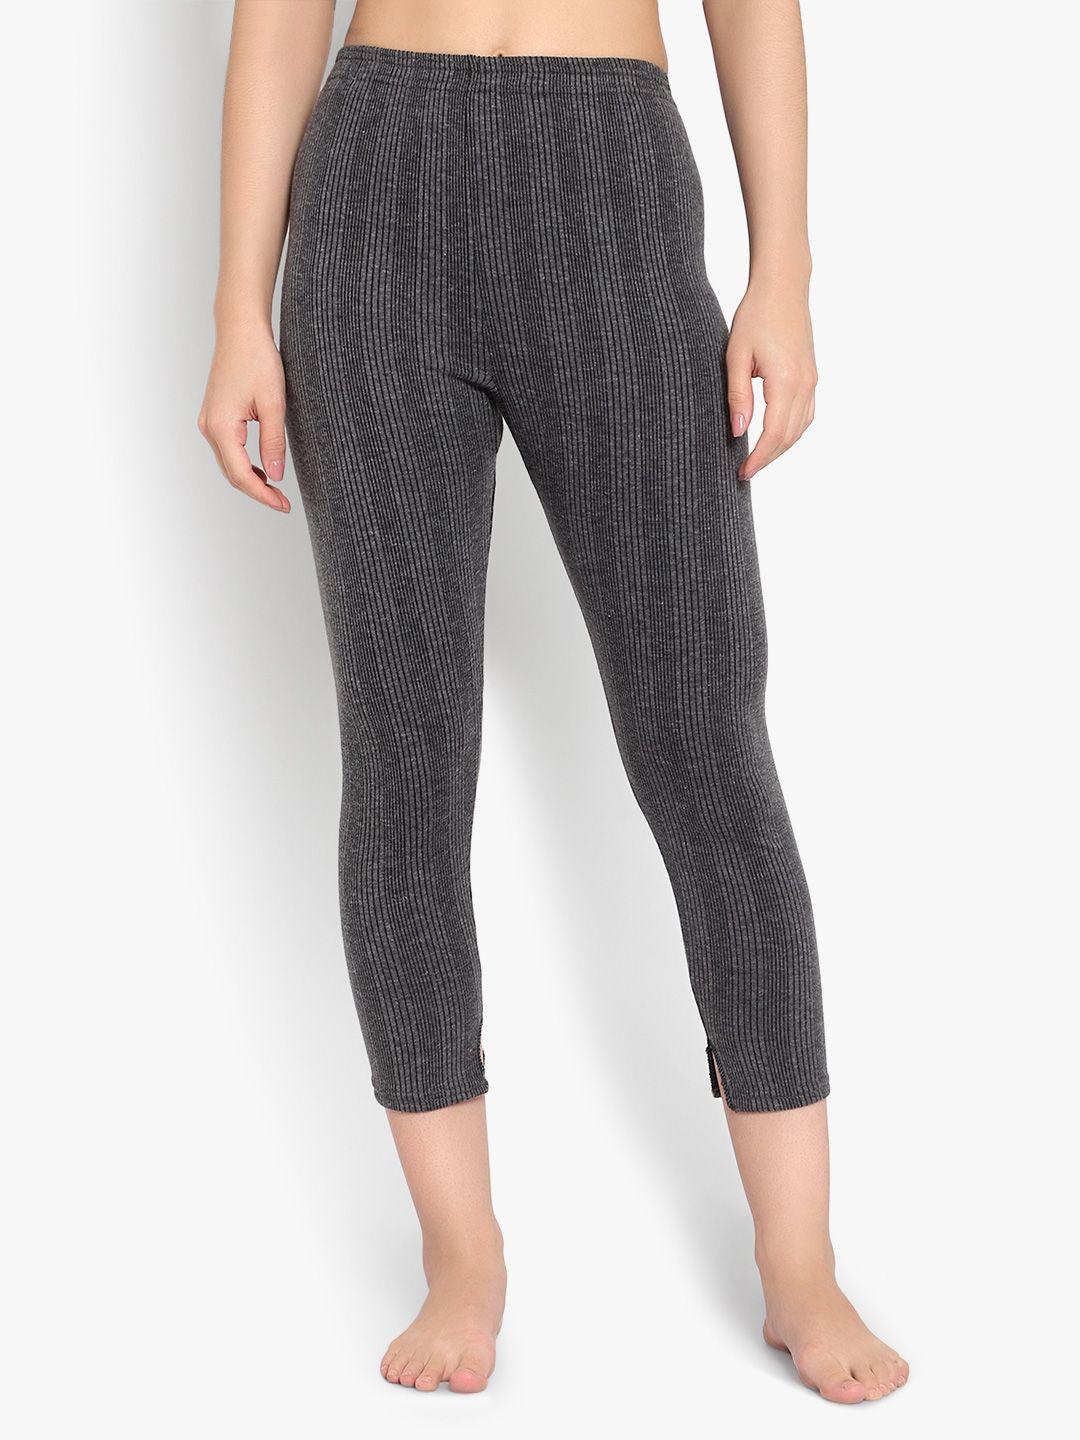 sky heights women grey striped cotton thermal bottoms